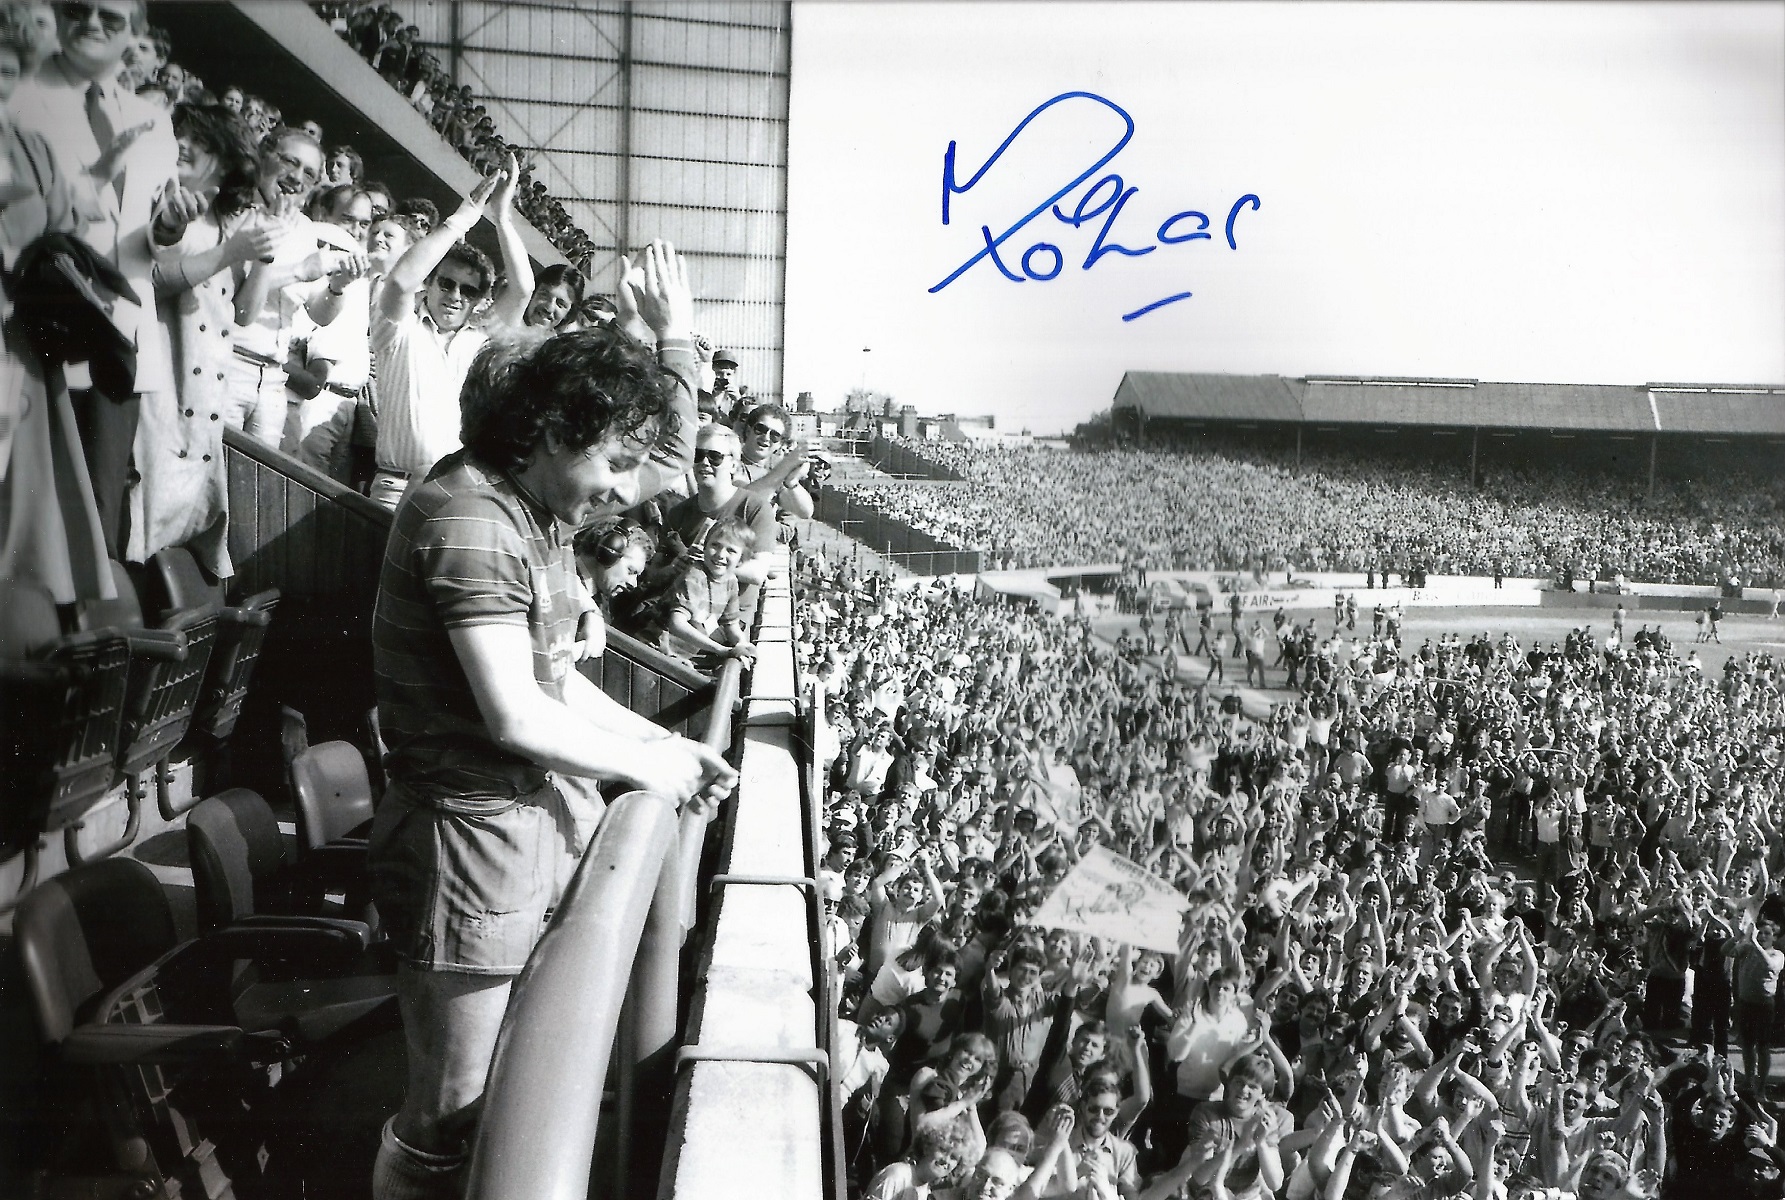 Football Legend Mickey Thomas Hand signed 10x8 Black and White Photo. Photo shows Thomas Receiving a